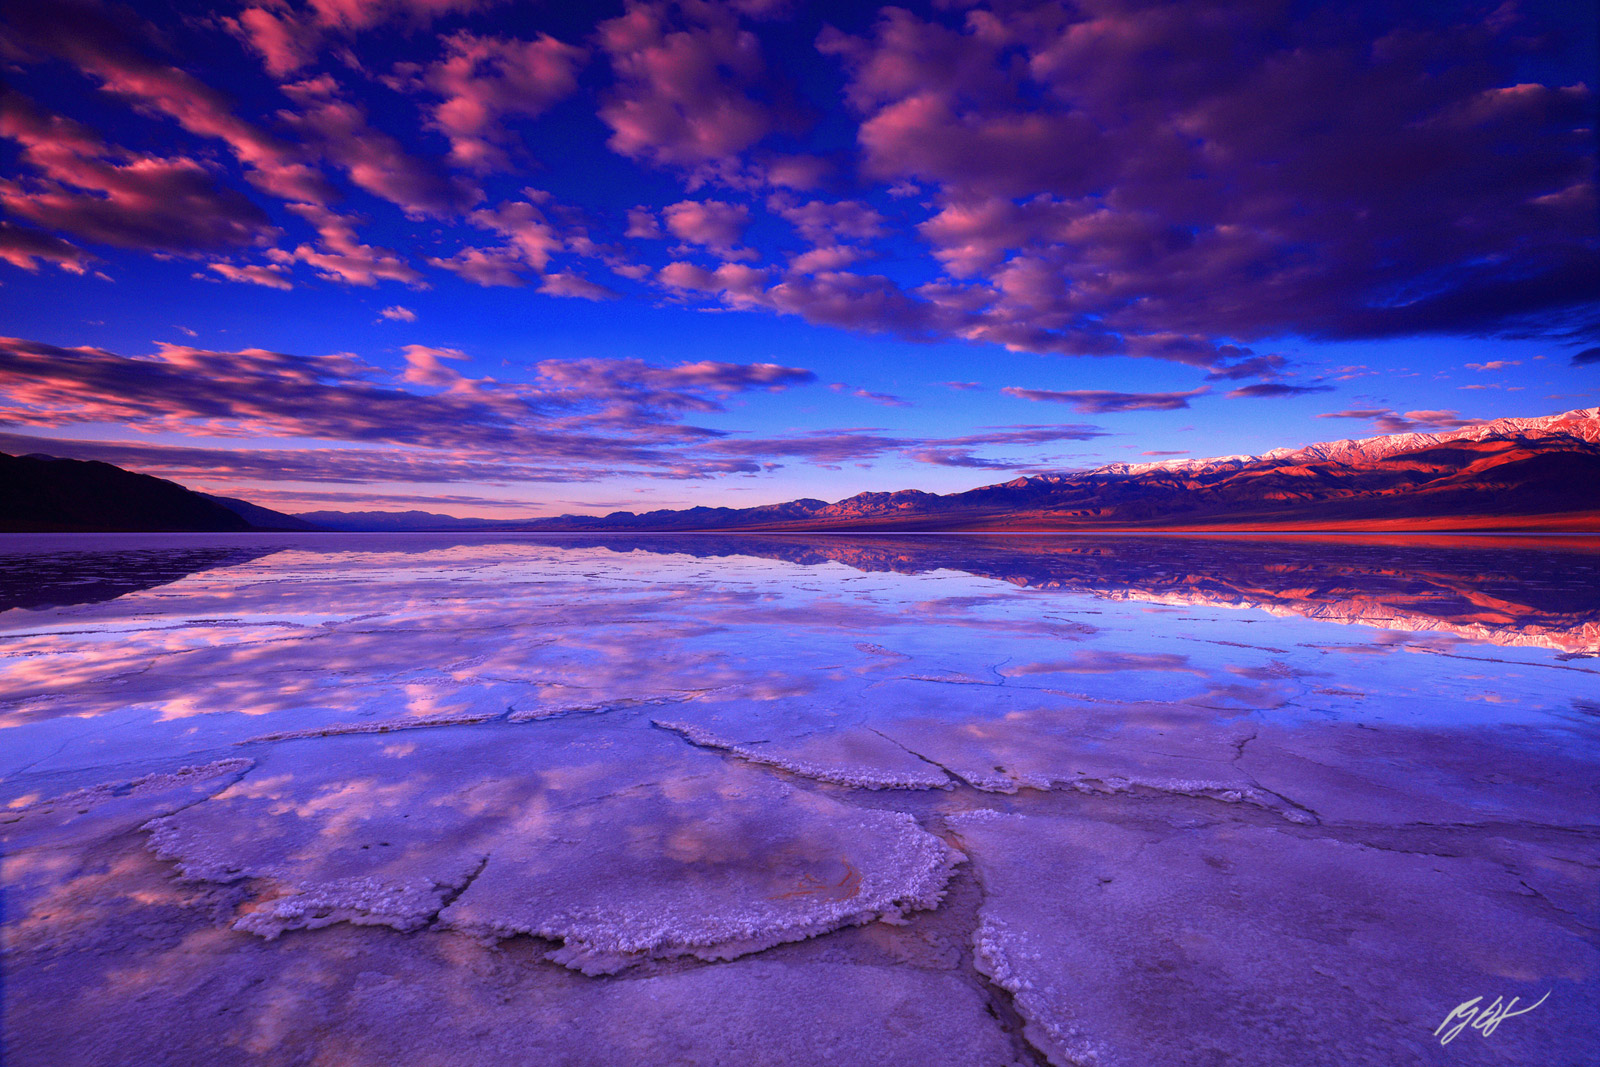 Sunrise Reflection on the Bad Water Salt Flats in Death Valley National Park in California